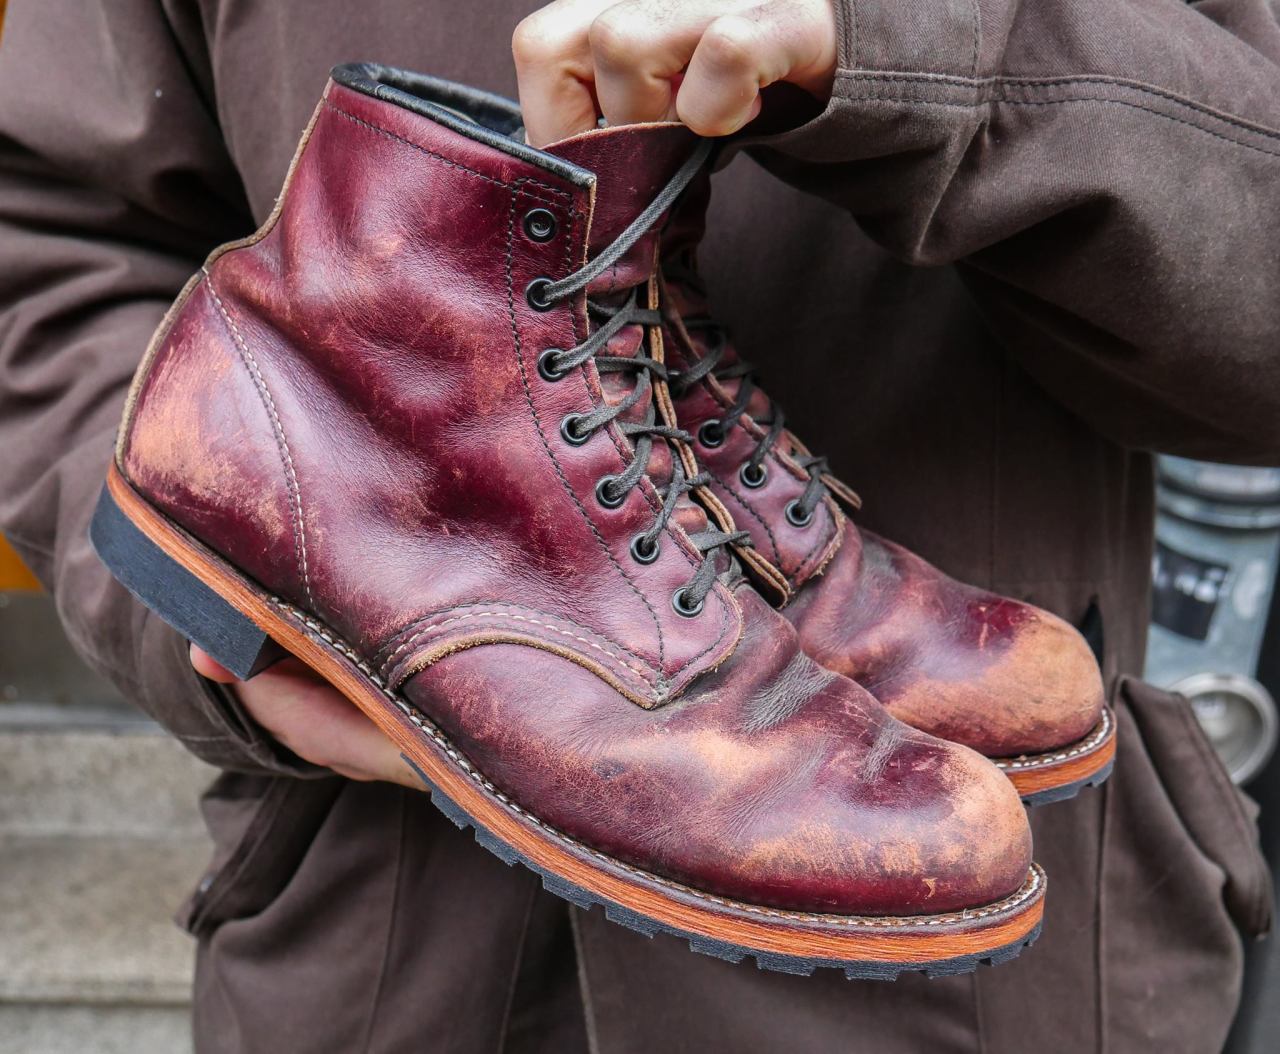 buy \u003e red wing boots marks, Up to 61% OFF